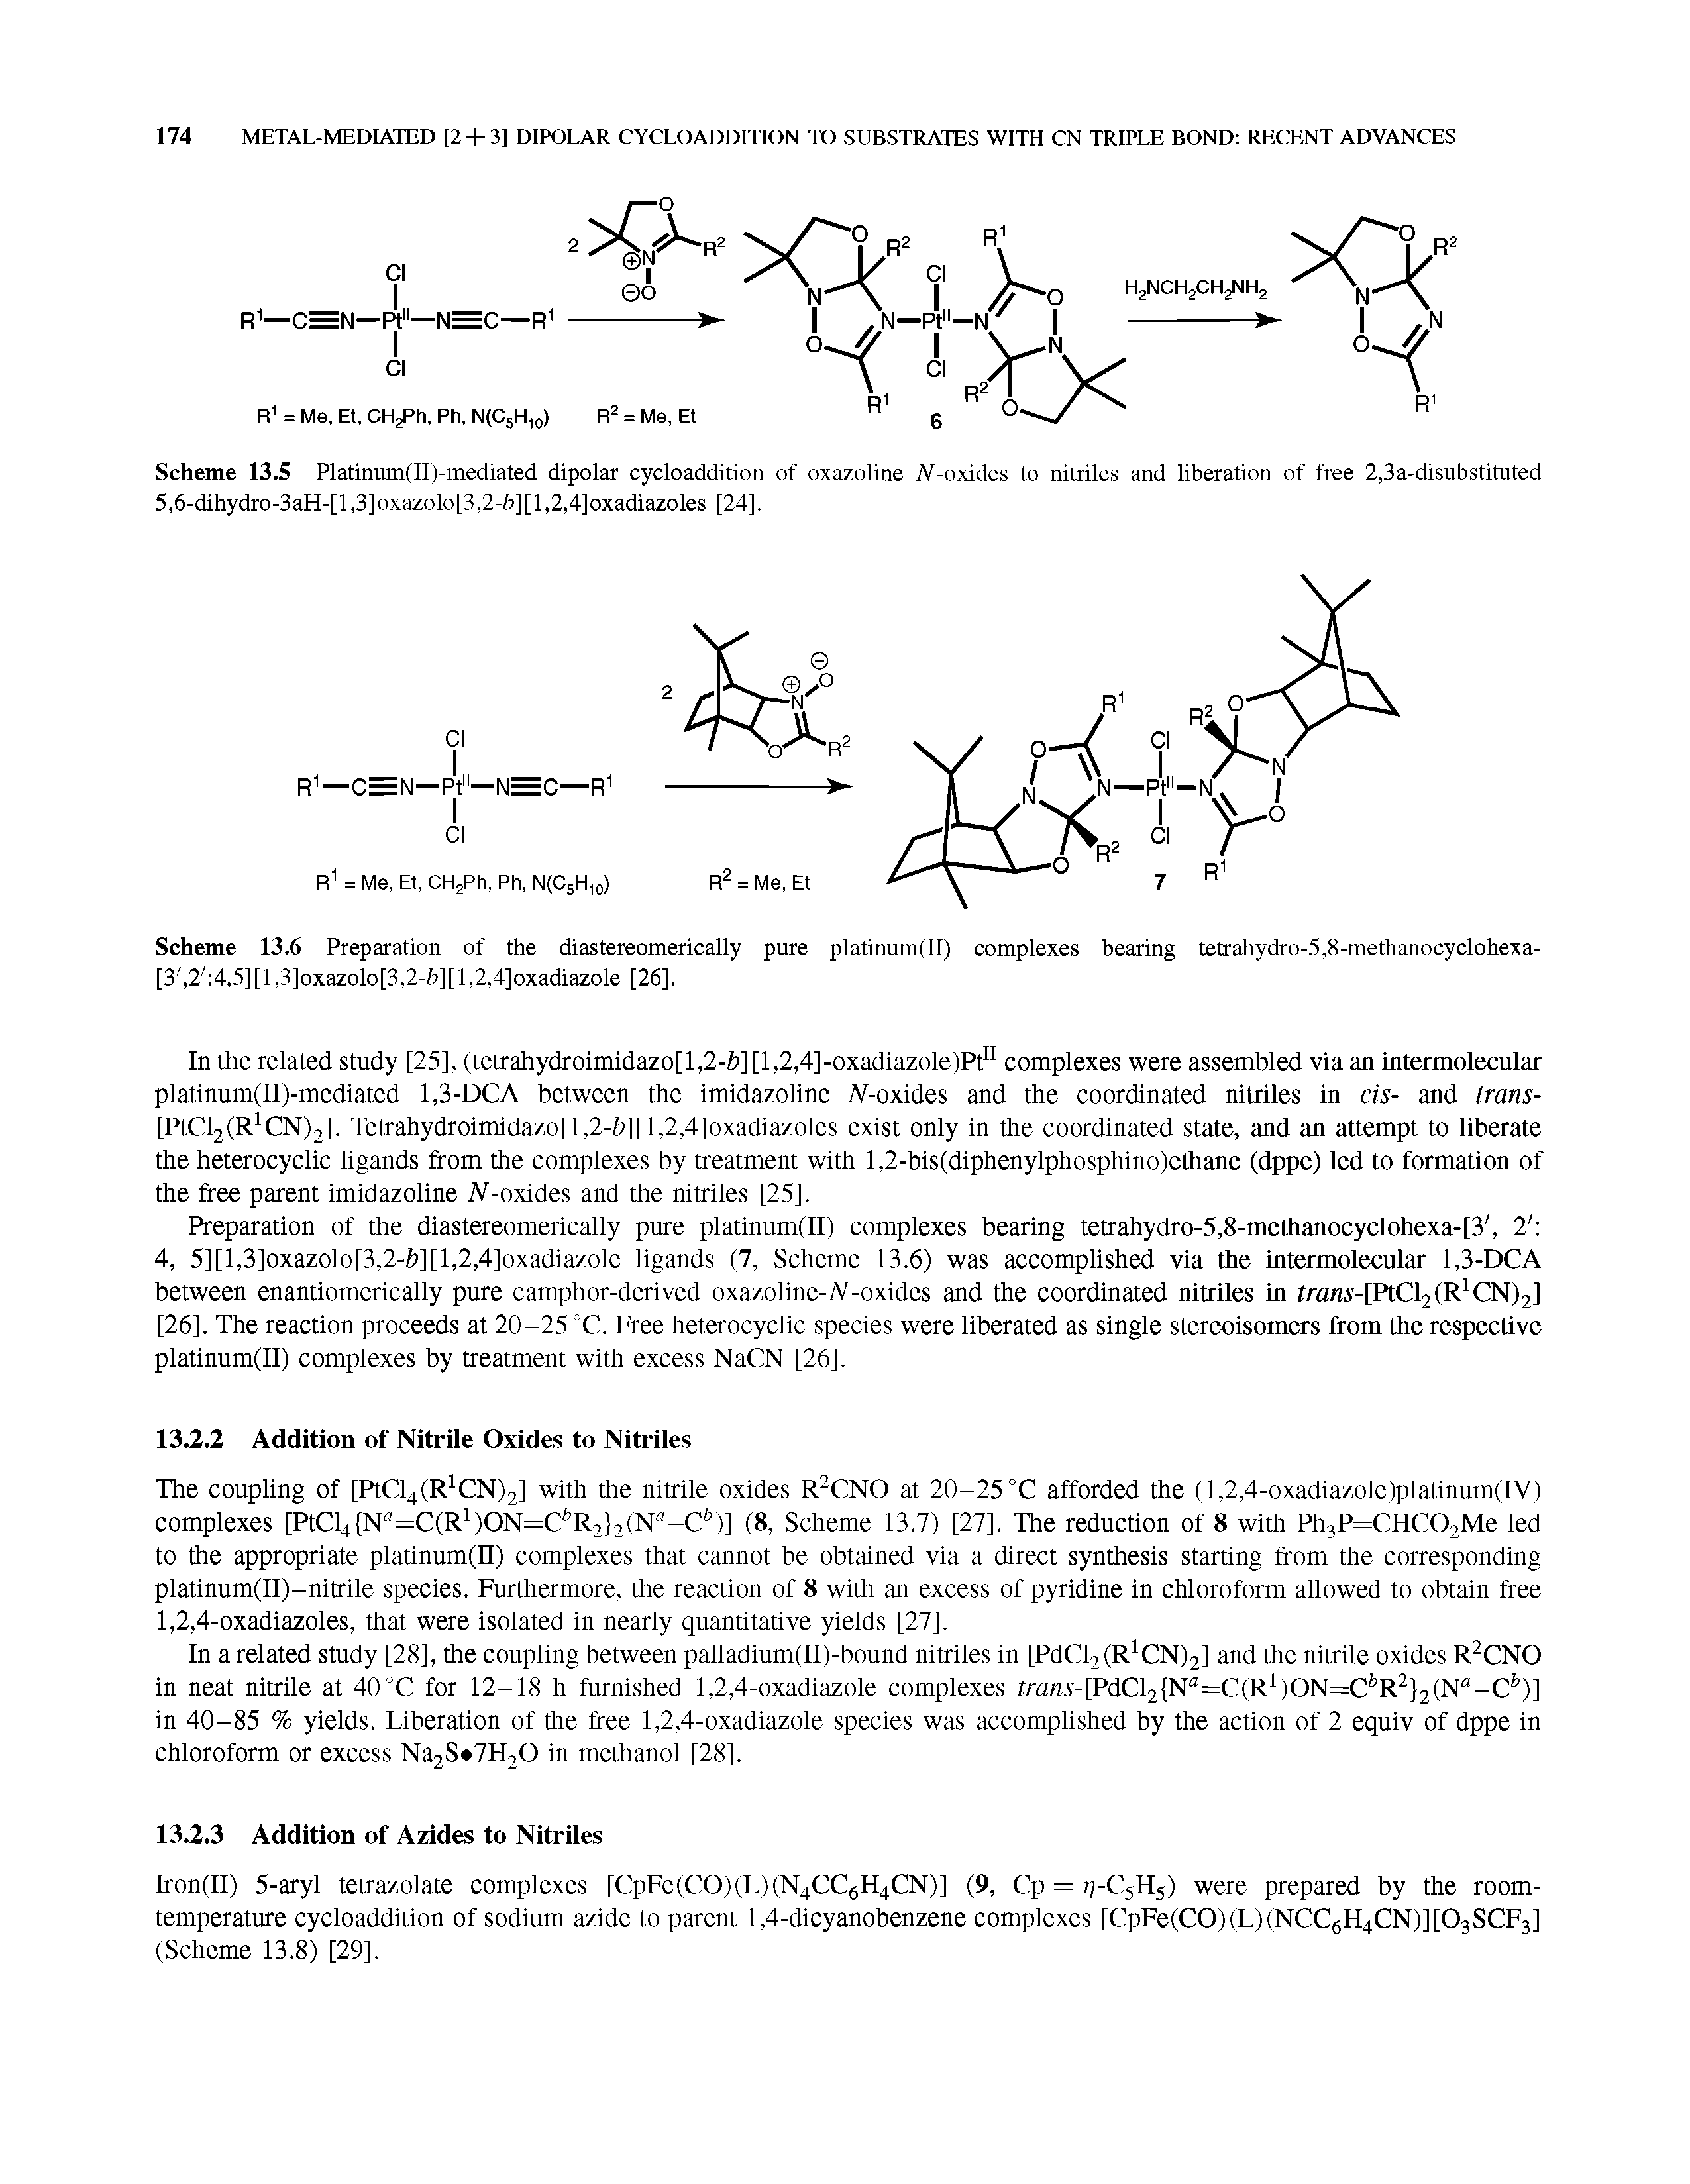 Scheme 13.5 Platinum(II)-mediated dipolar cycloaddition of oxazoline -oxides to nitriles and liberation of free 2,3a-disubstituted 5,6-dihydro-3aH-[l,3]oxazolo[3,2-ii][l,2,4]oxadiazoles [24],...